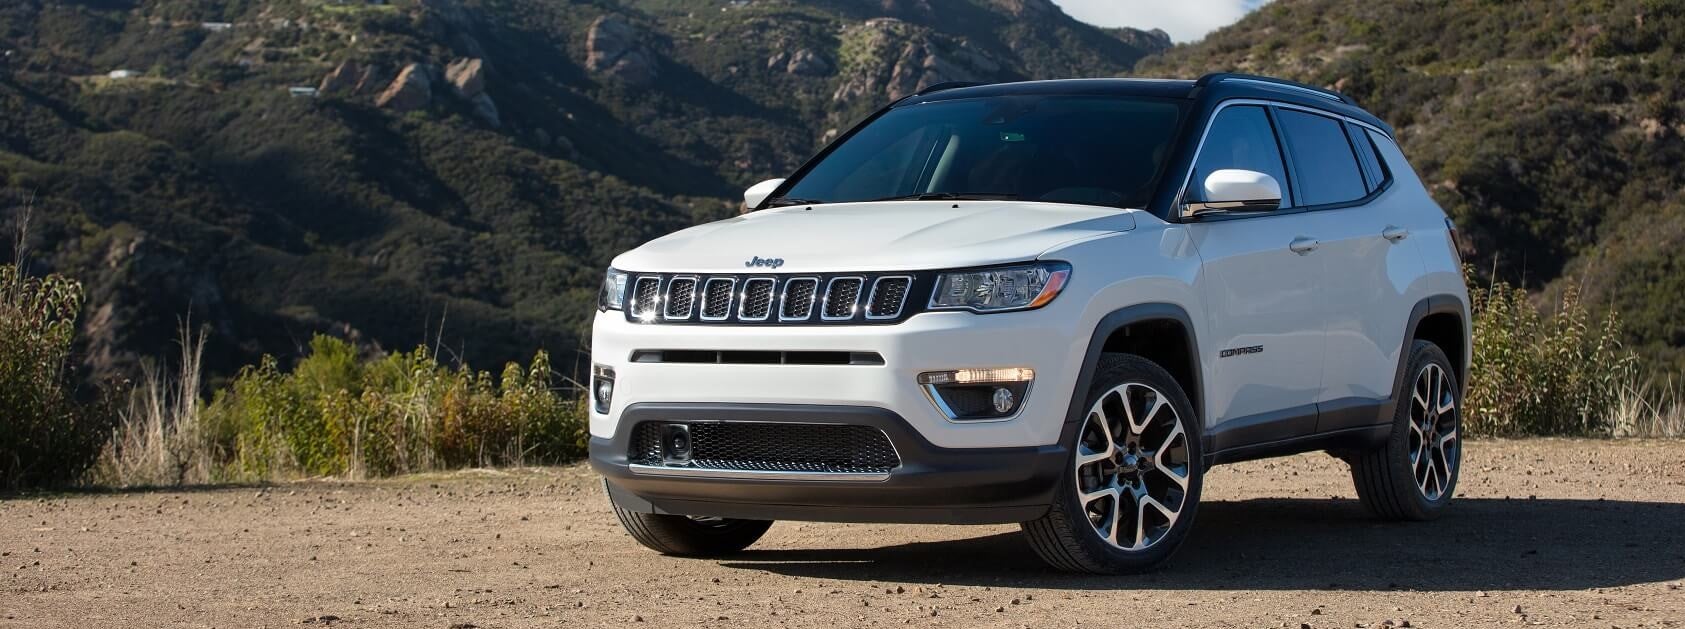 Jeep Compass Lease Deals Clarks Summit PA